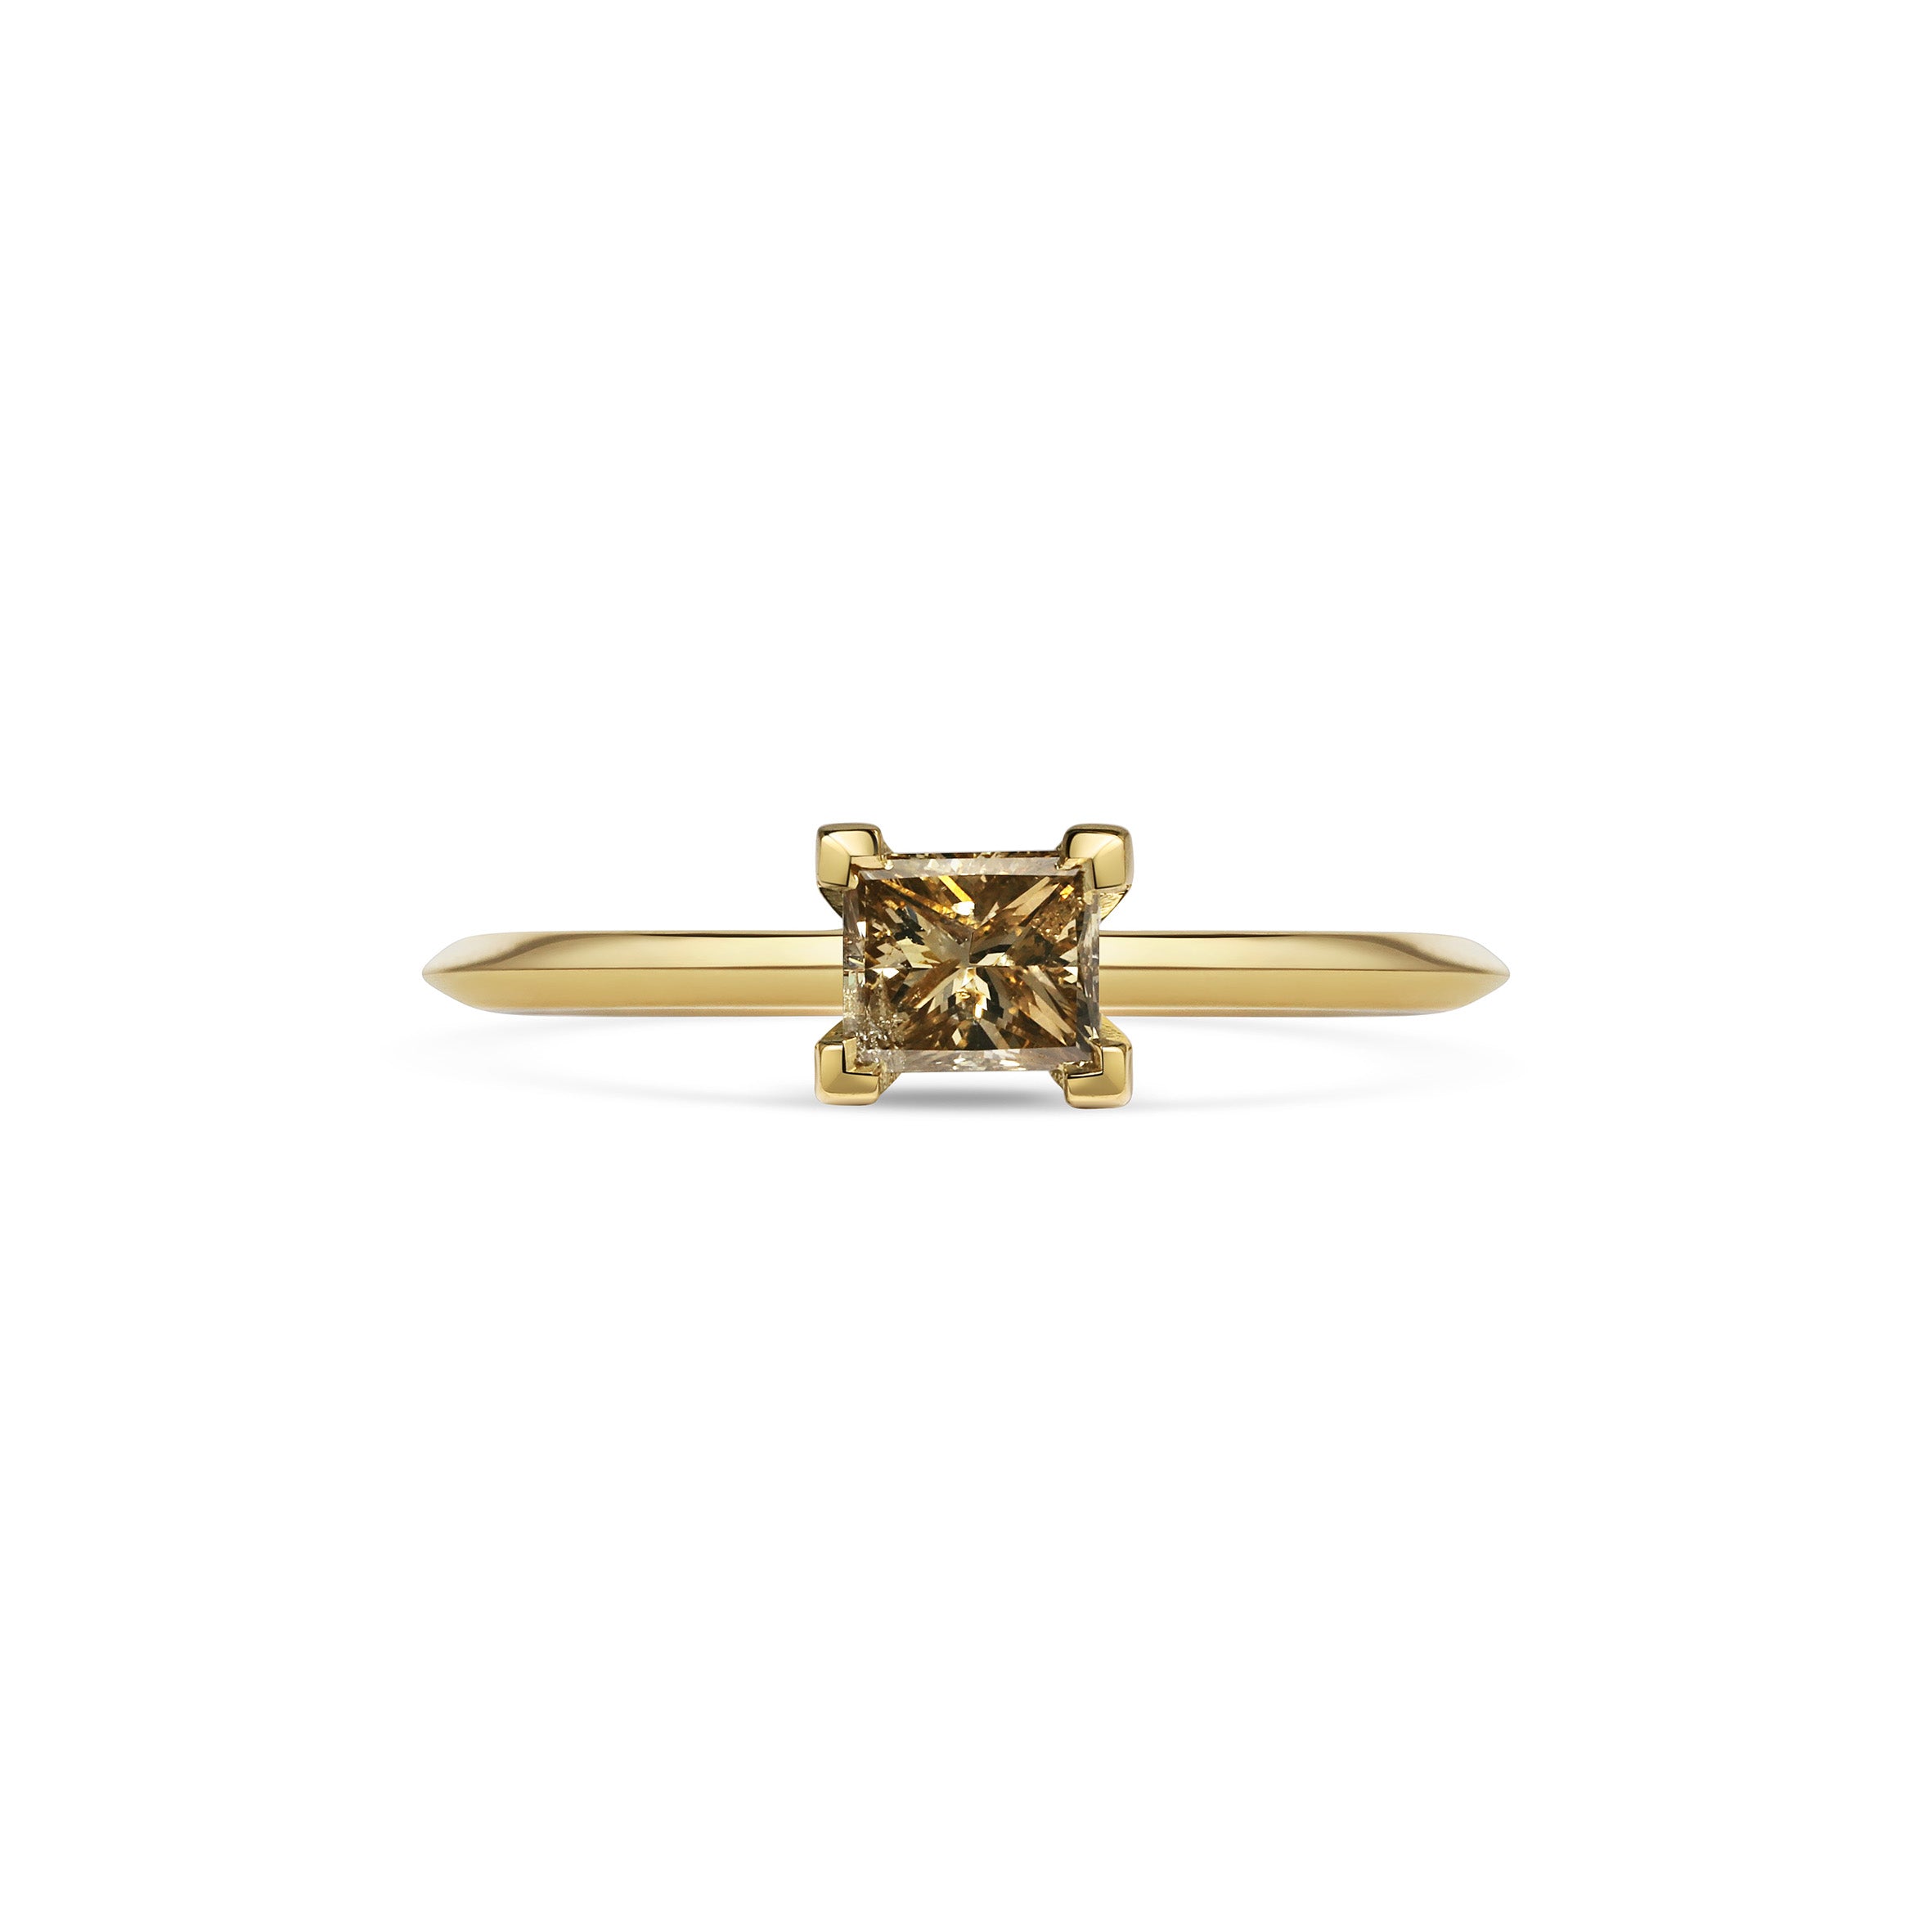 The Avenay Ring by East London jeweller Rachel Boston | Discover our collections of unique and timeless engagement rings, wedding rings, and modern fine jewellery.